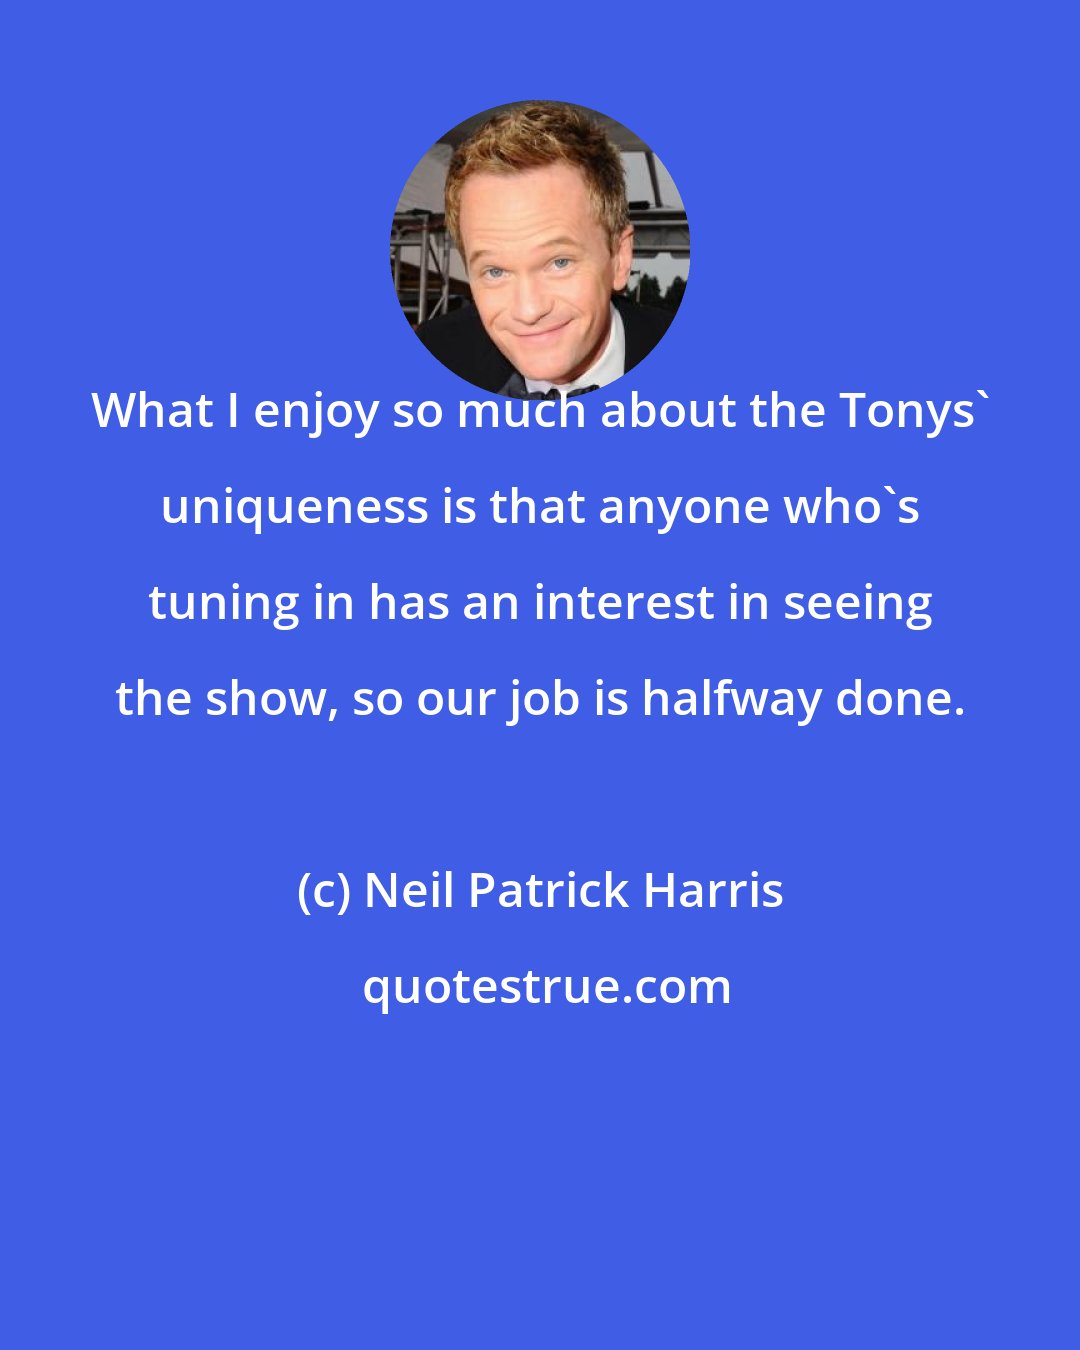 Neil Patrick Harris: What I enjoy so much about the Tonys' uniqueness is that anyone who's tuning in has an interest in seeing the show, so our job is halfway done.